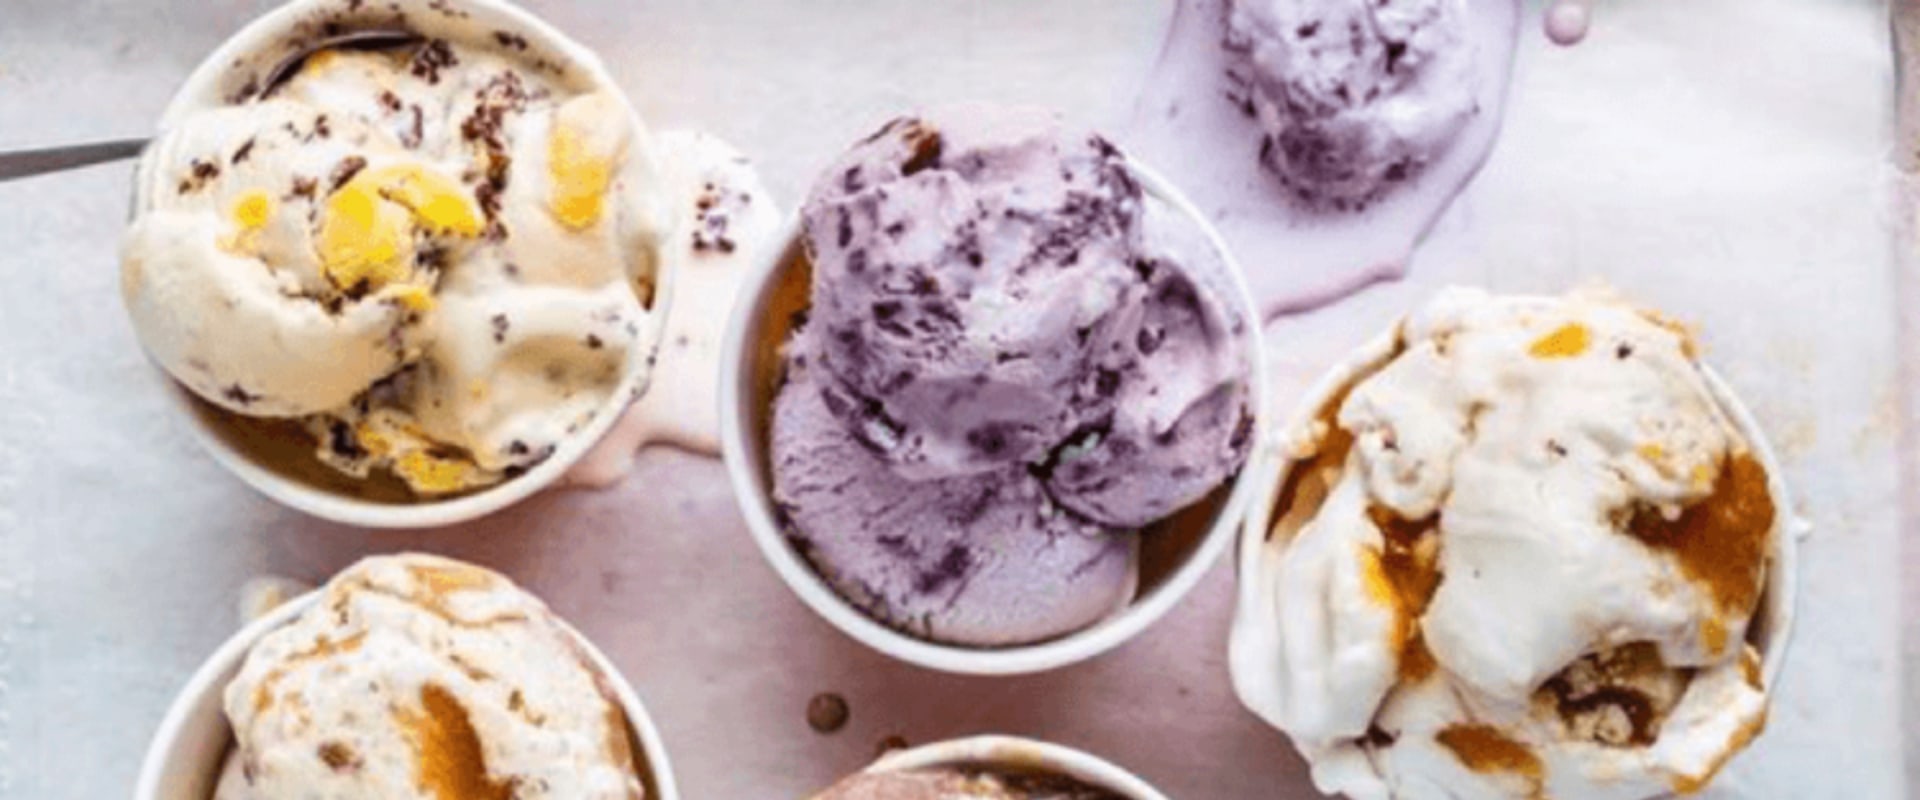 10 Best Ice Cream Shops in Williamson County, TX for Kids